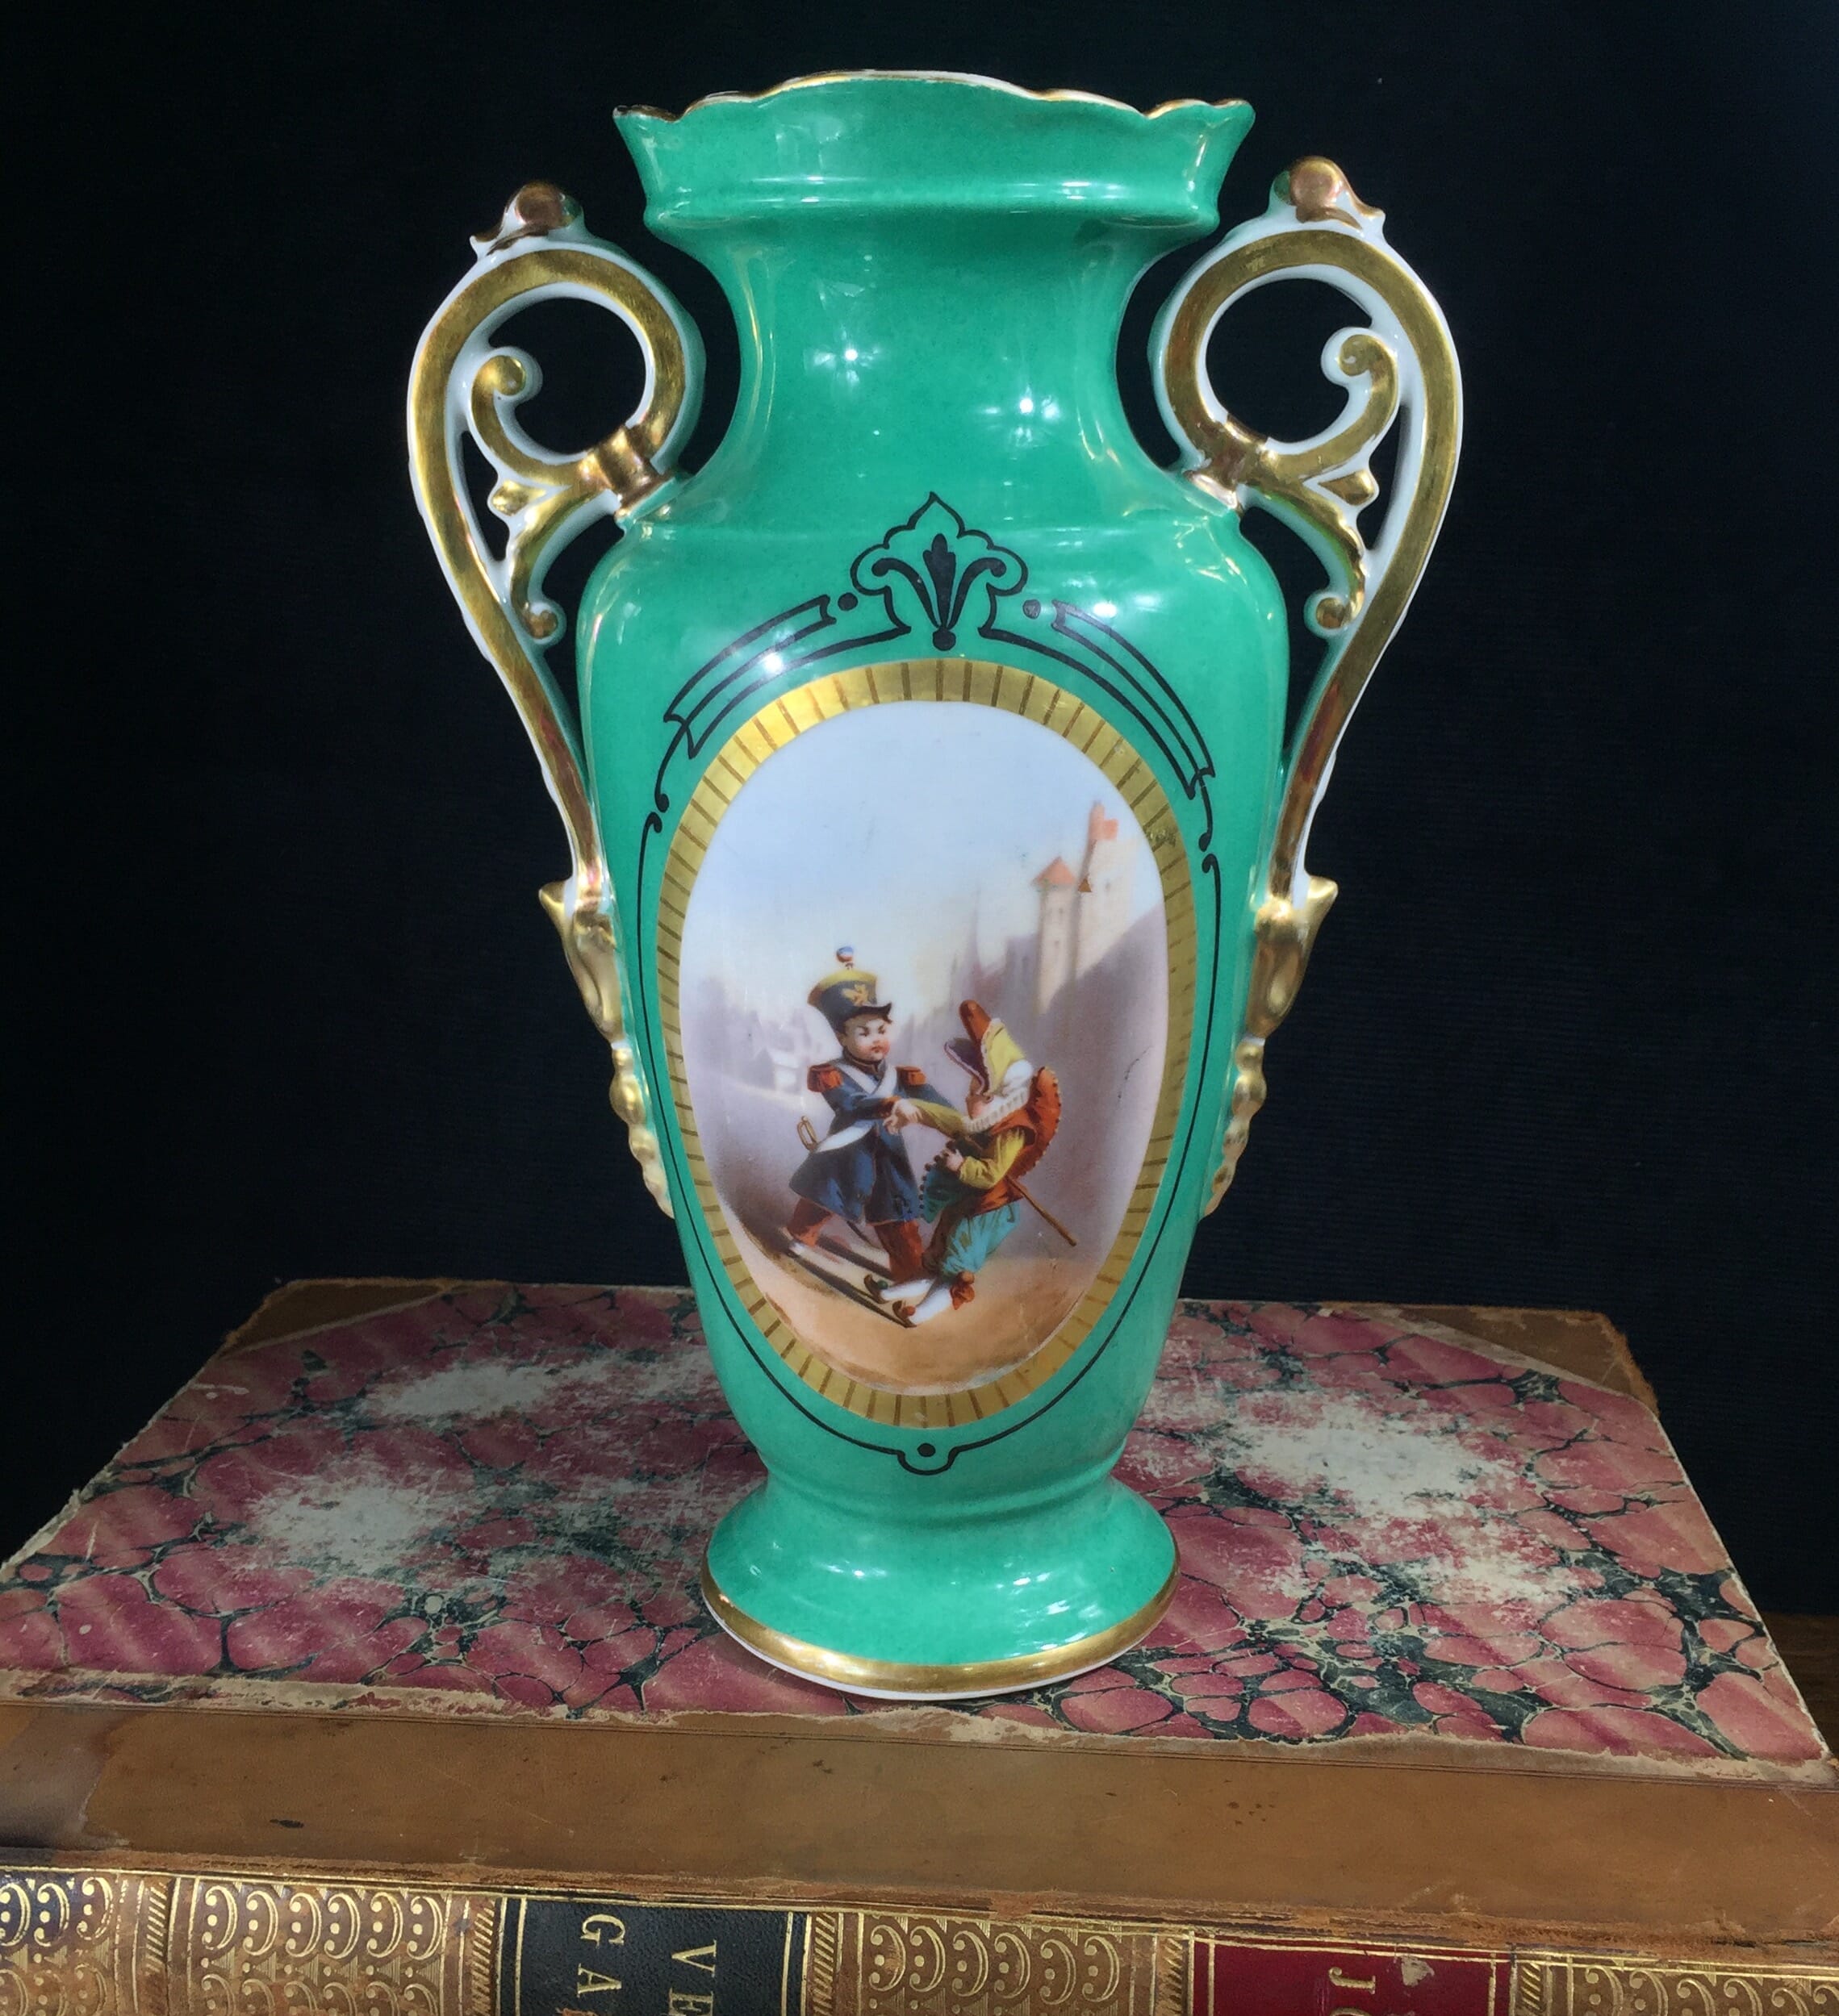 Limoges porcelain vase with children playing soldiers on a green ground. c. 1875-0